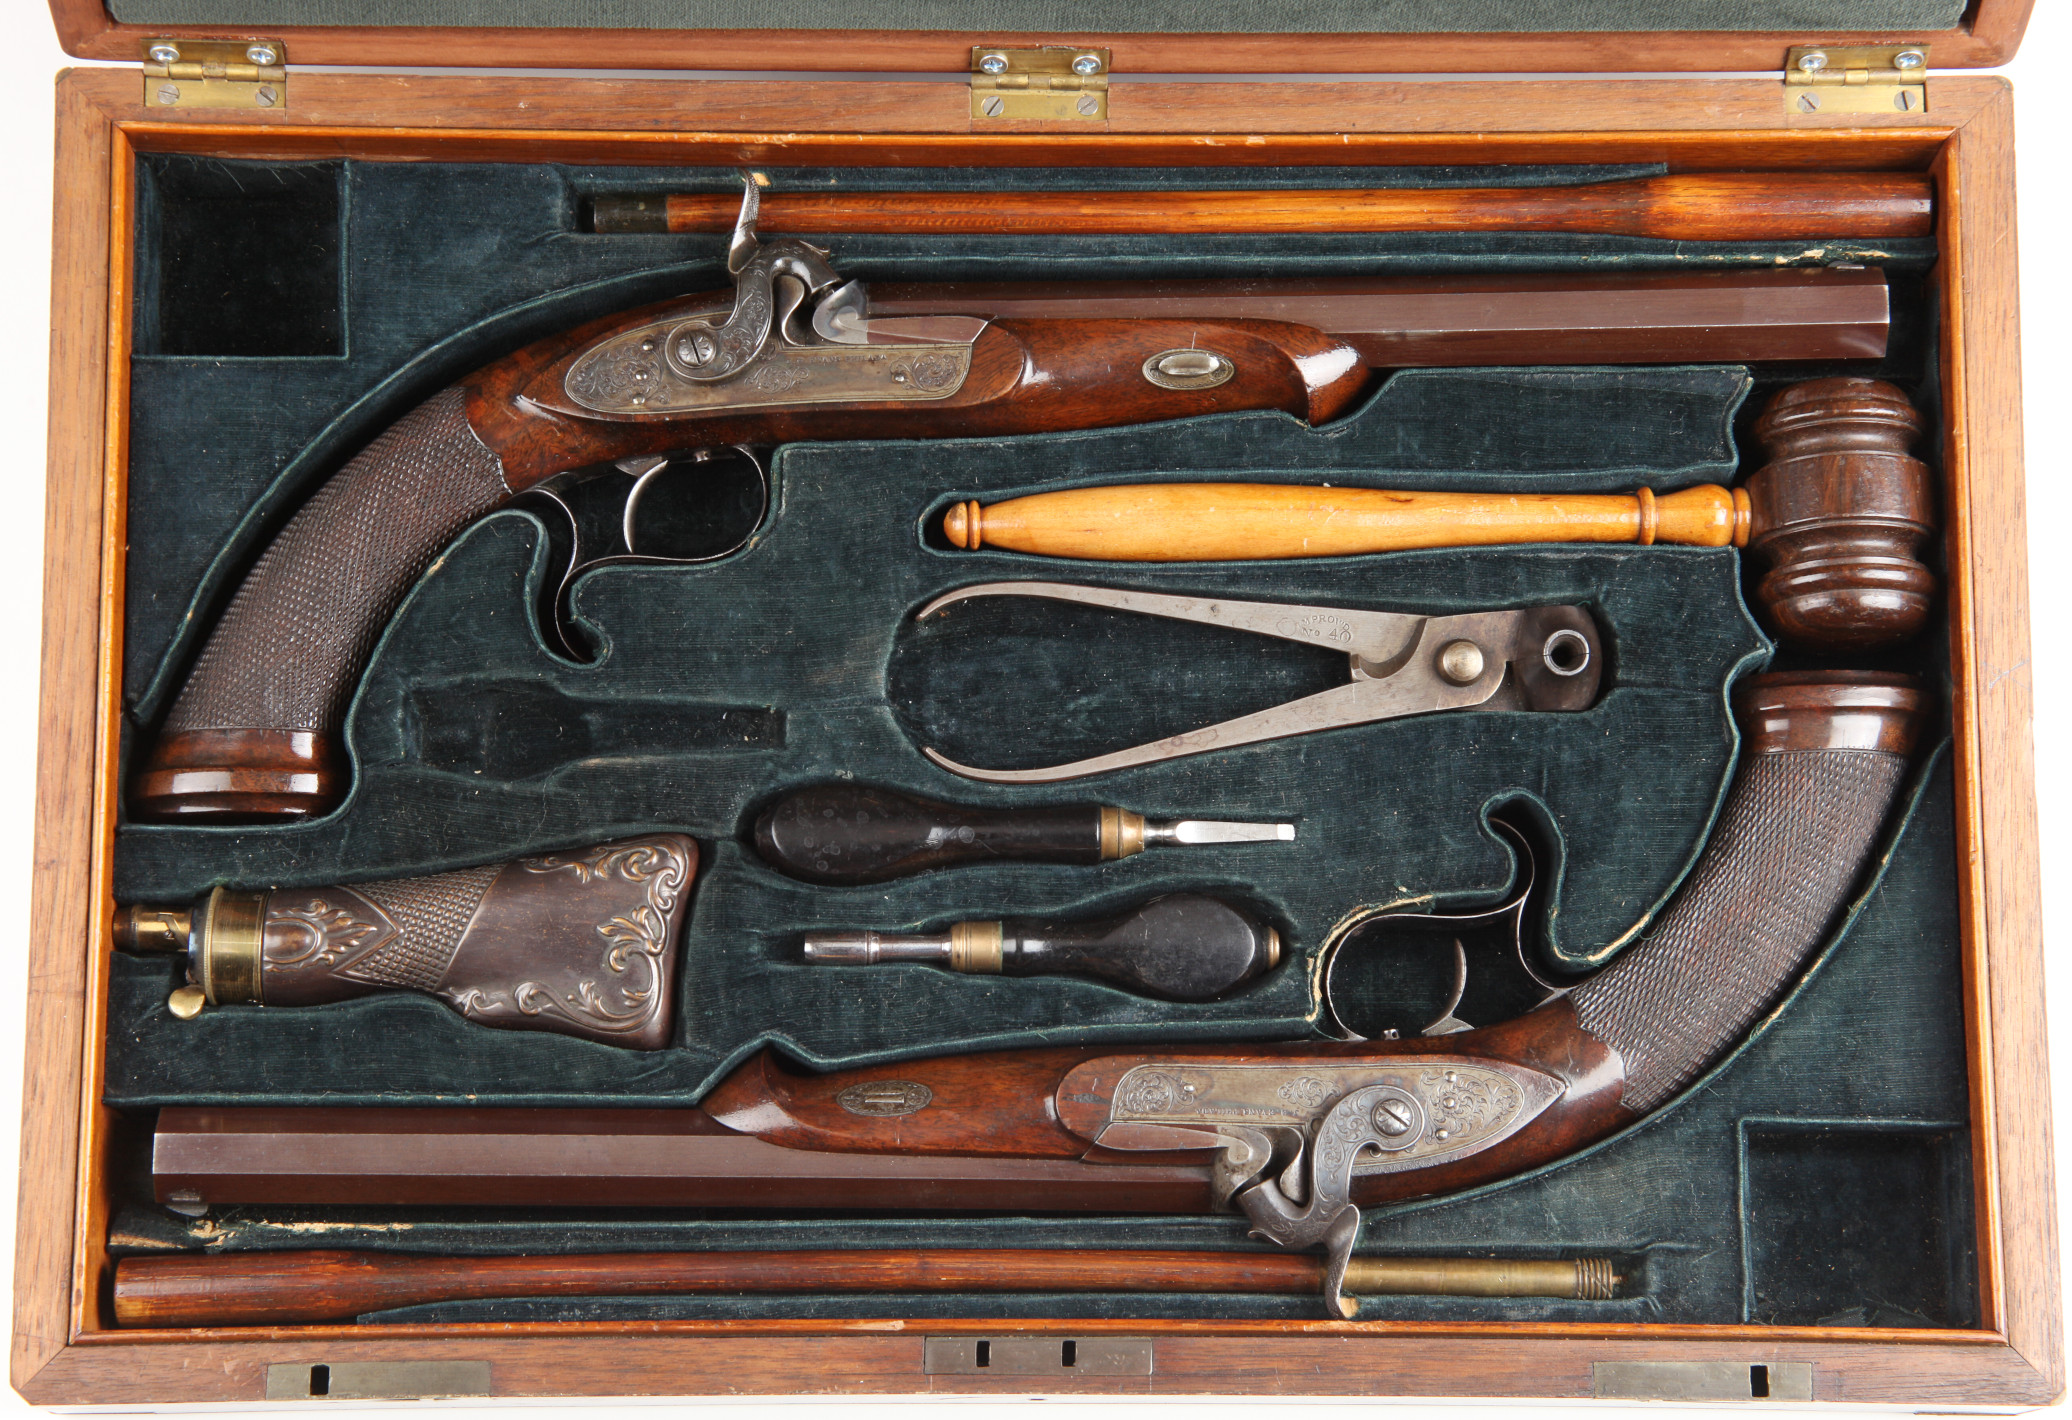 Pair of American Dueling Pistols Presented to General Edward Salomon by the Citizens of Cook County, Illinois in 1867
